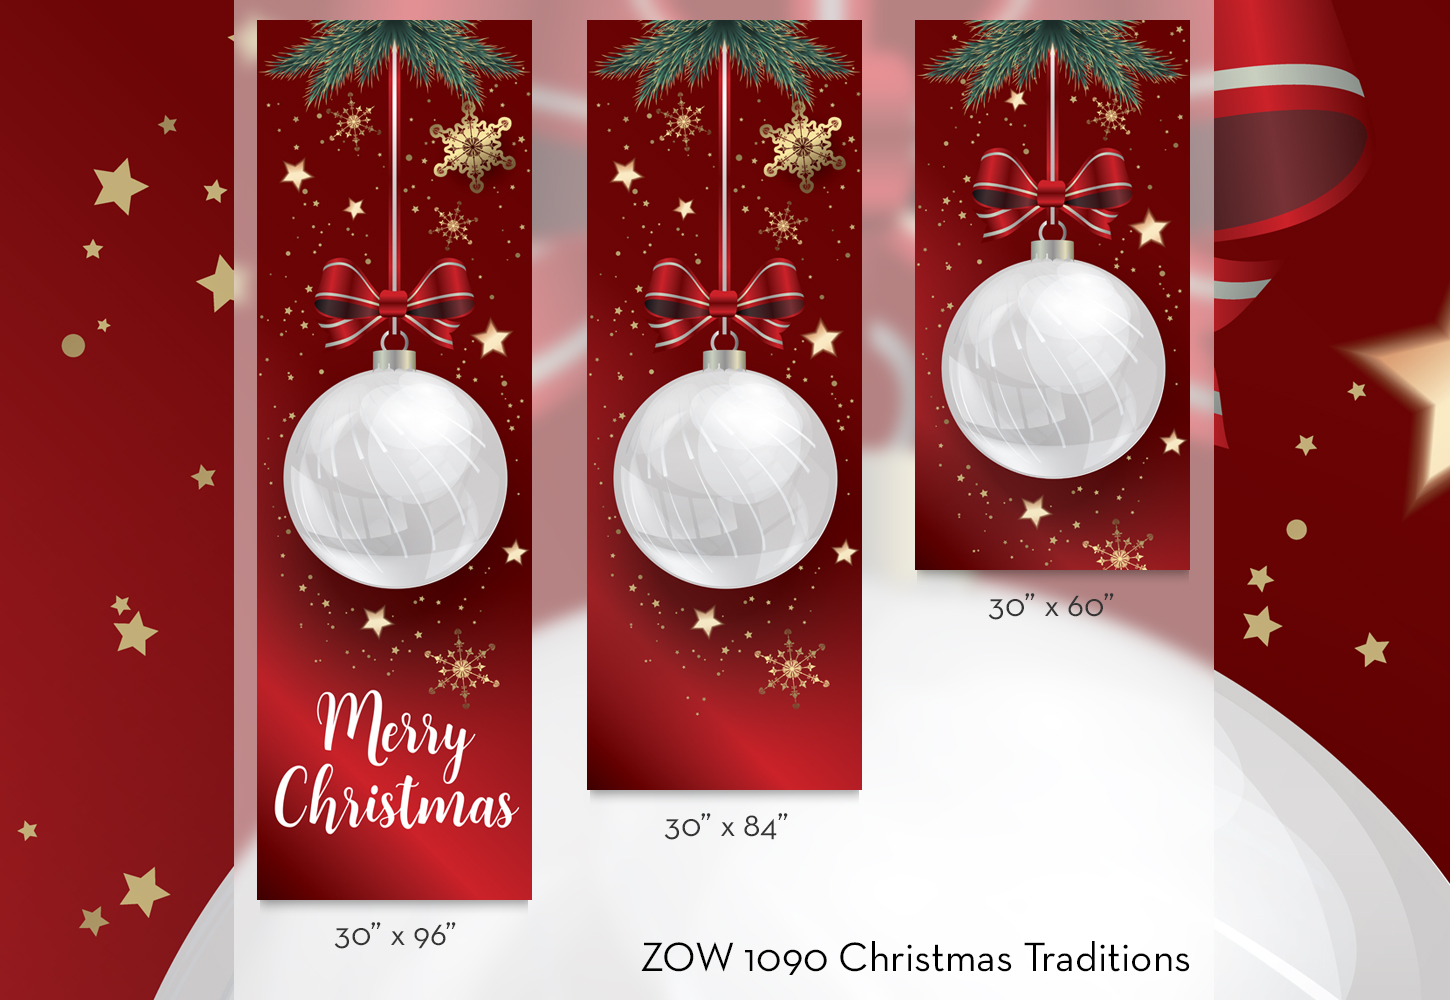 ZOW 1090 Christmas Traditions